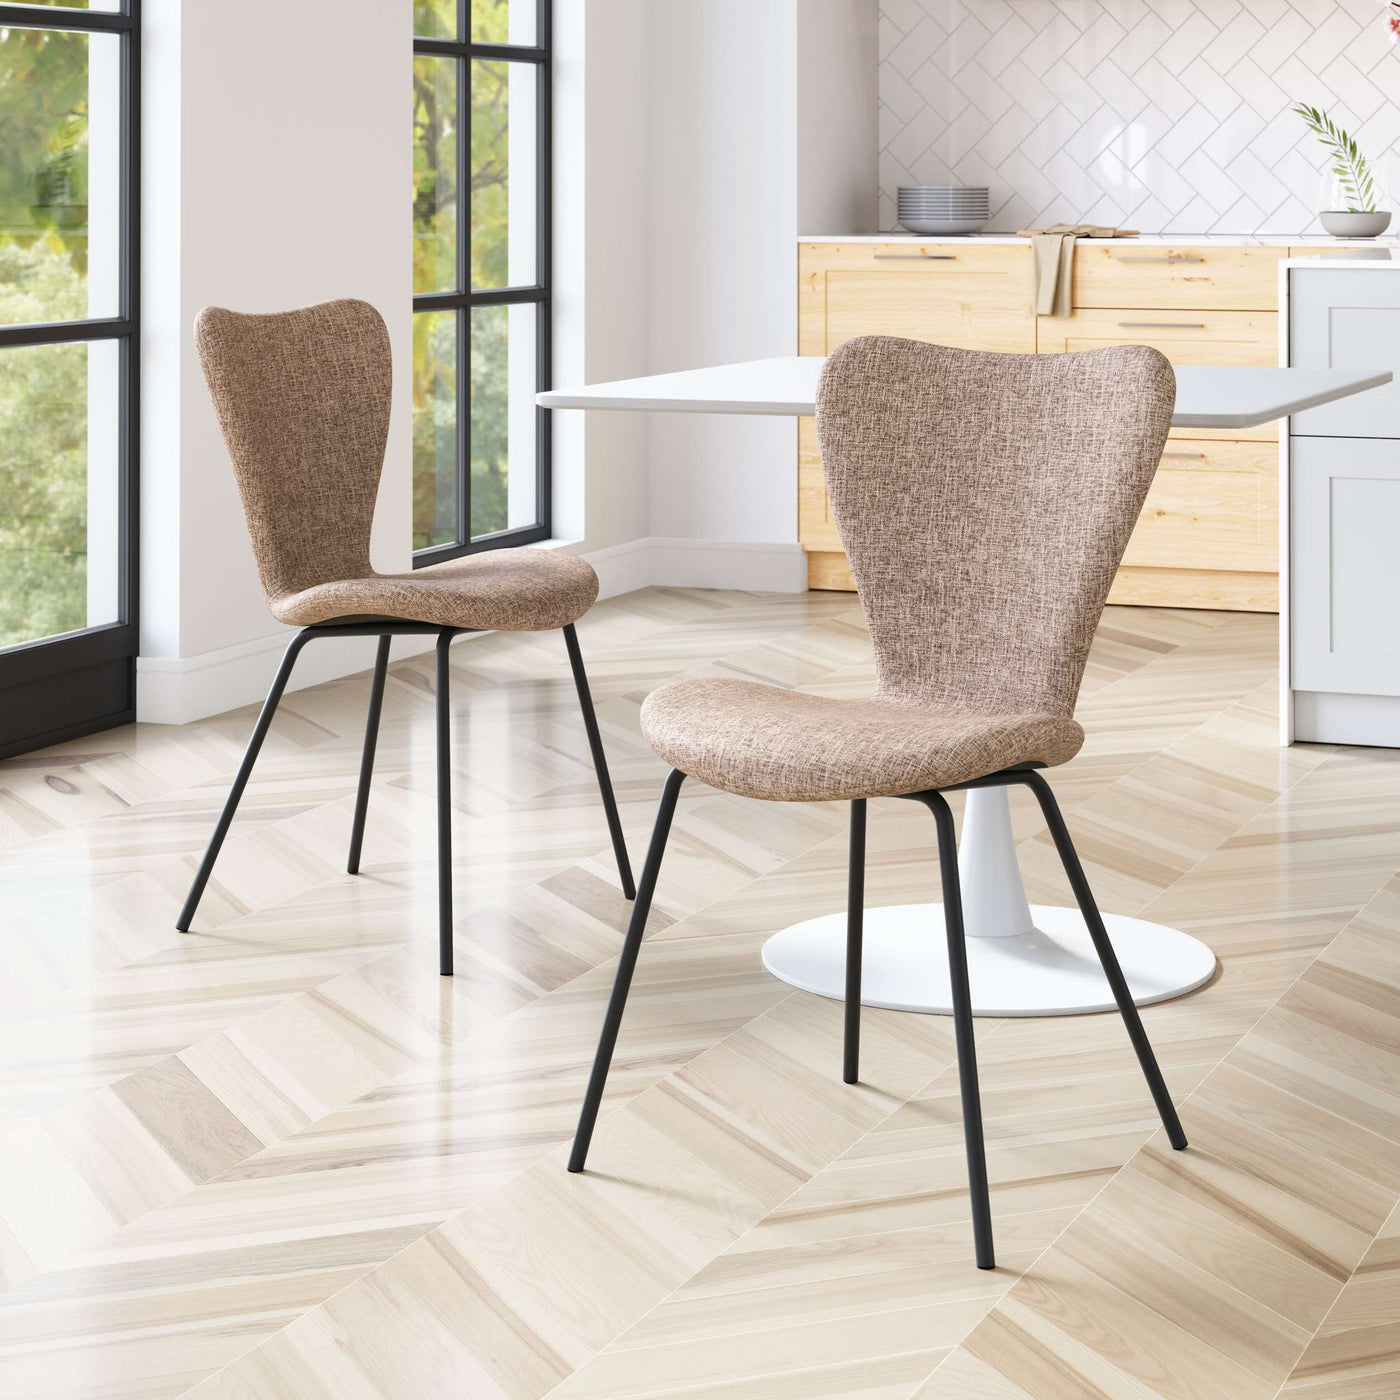 Zuo Mod Tollo Dining Chair